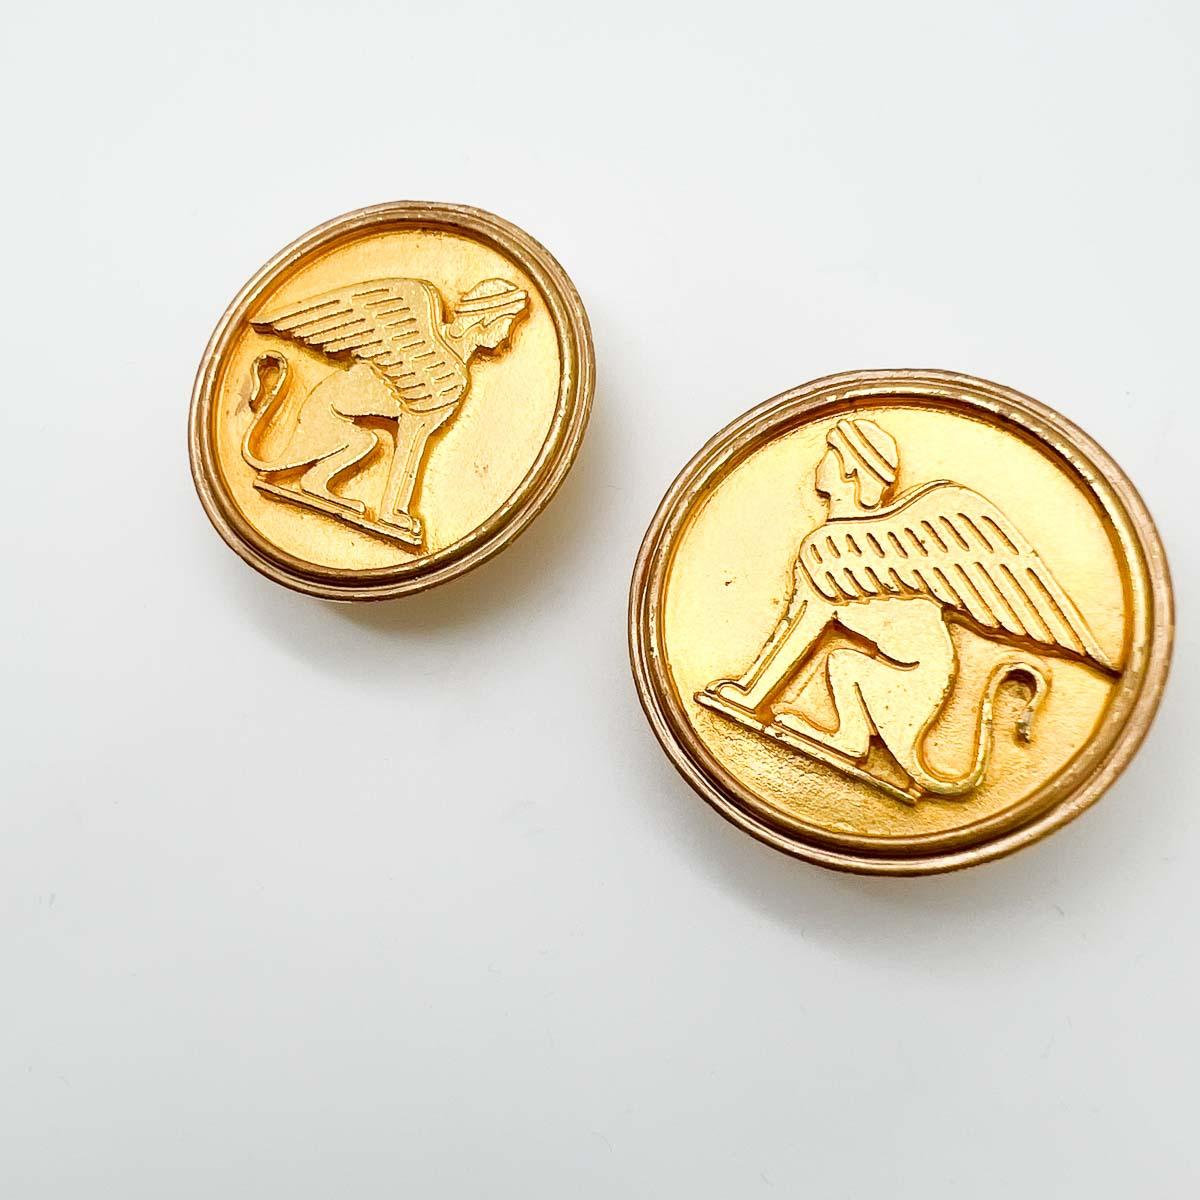 Vintage Egyptian Sphinx Earrings crafted with a rich high carat gold plate finish. A bold gold style statement that carries stories from thousands of years of mythological history.

An unsigned beauty. A rare treasure. Just because a jewel doesn’t